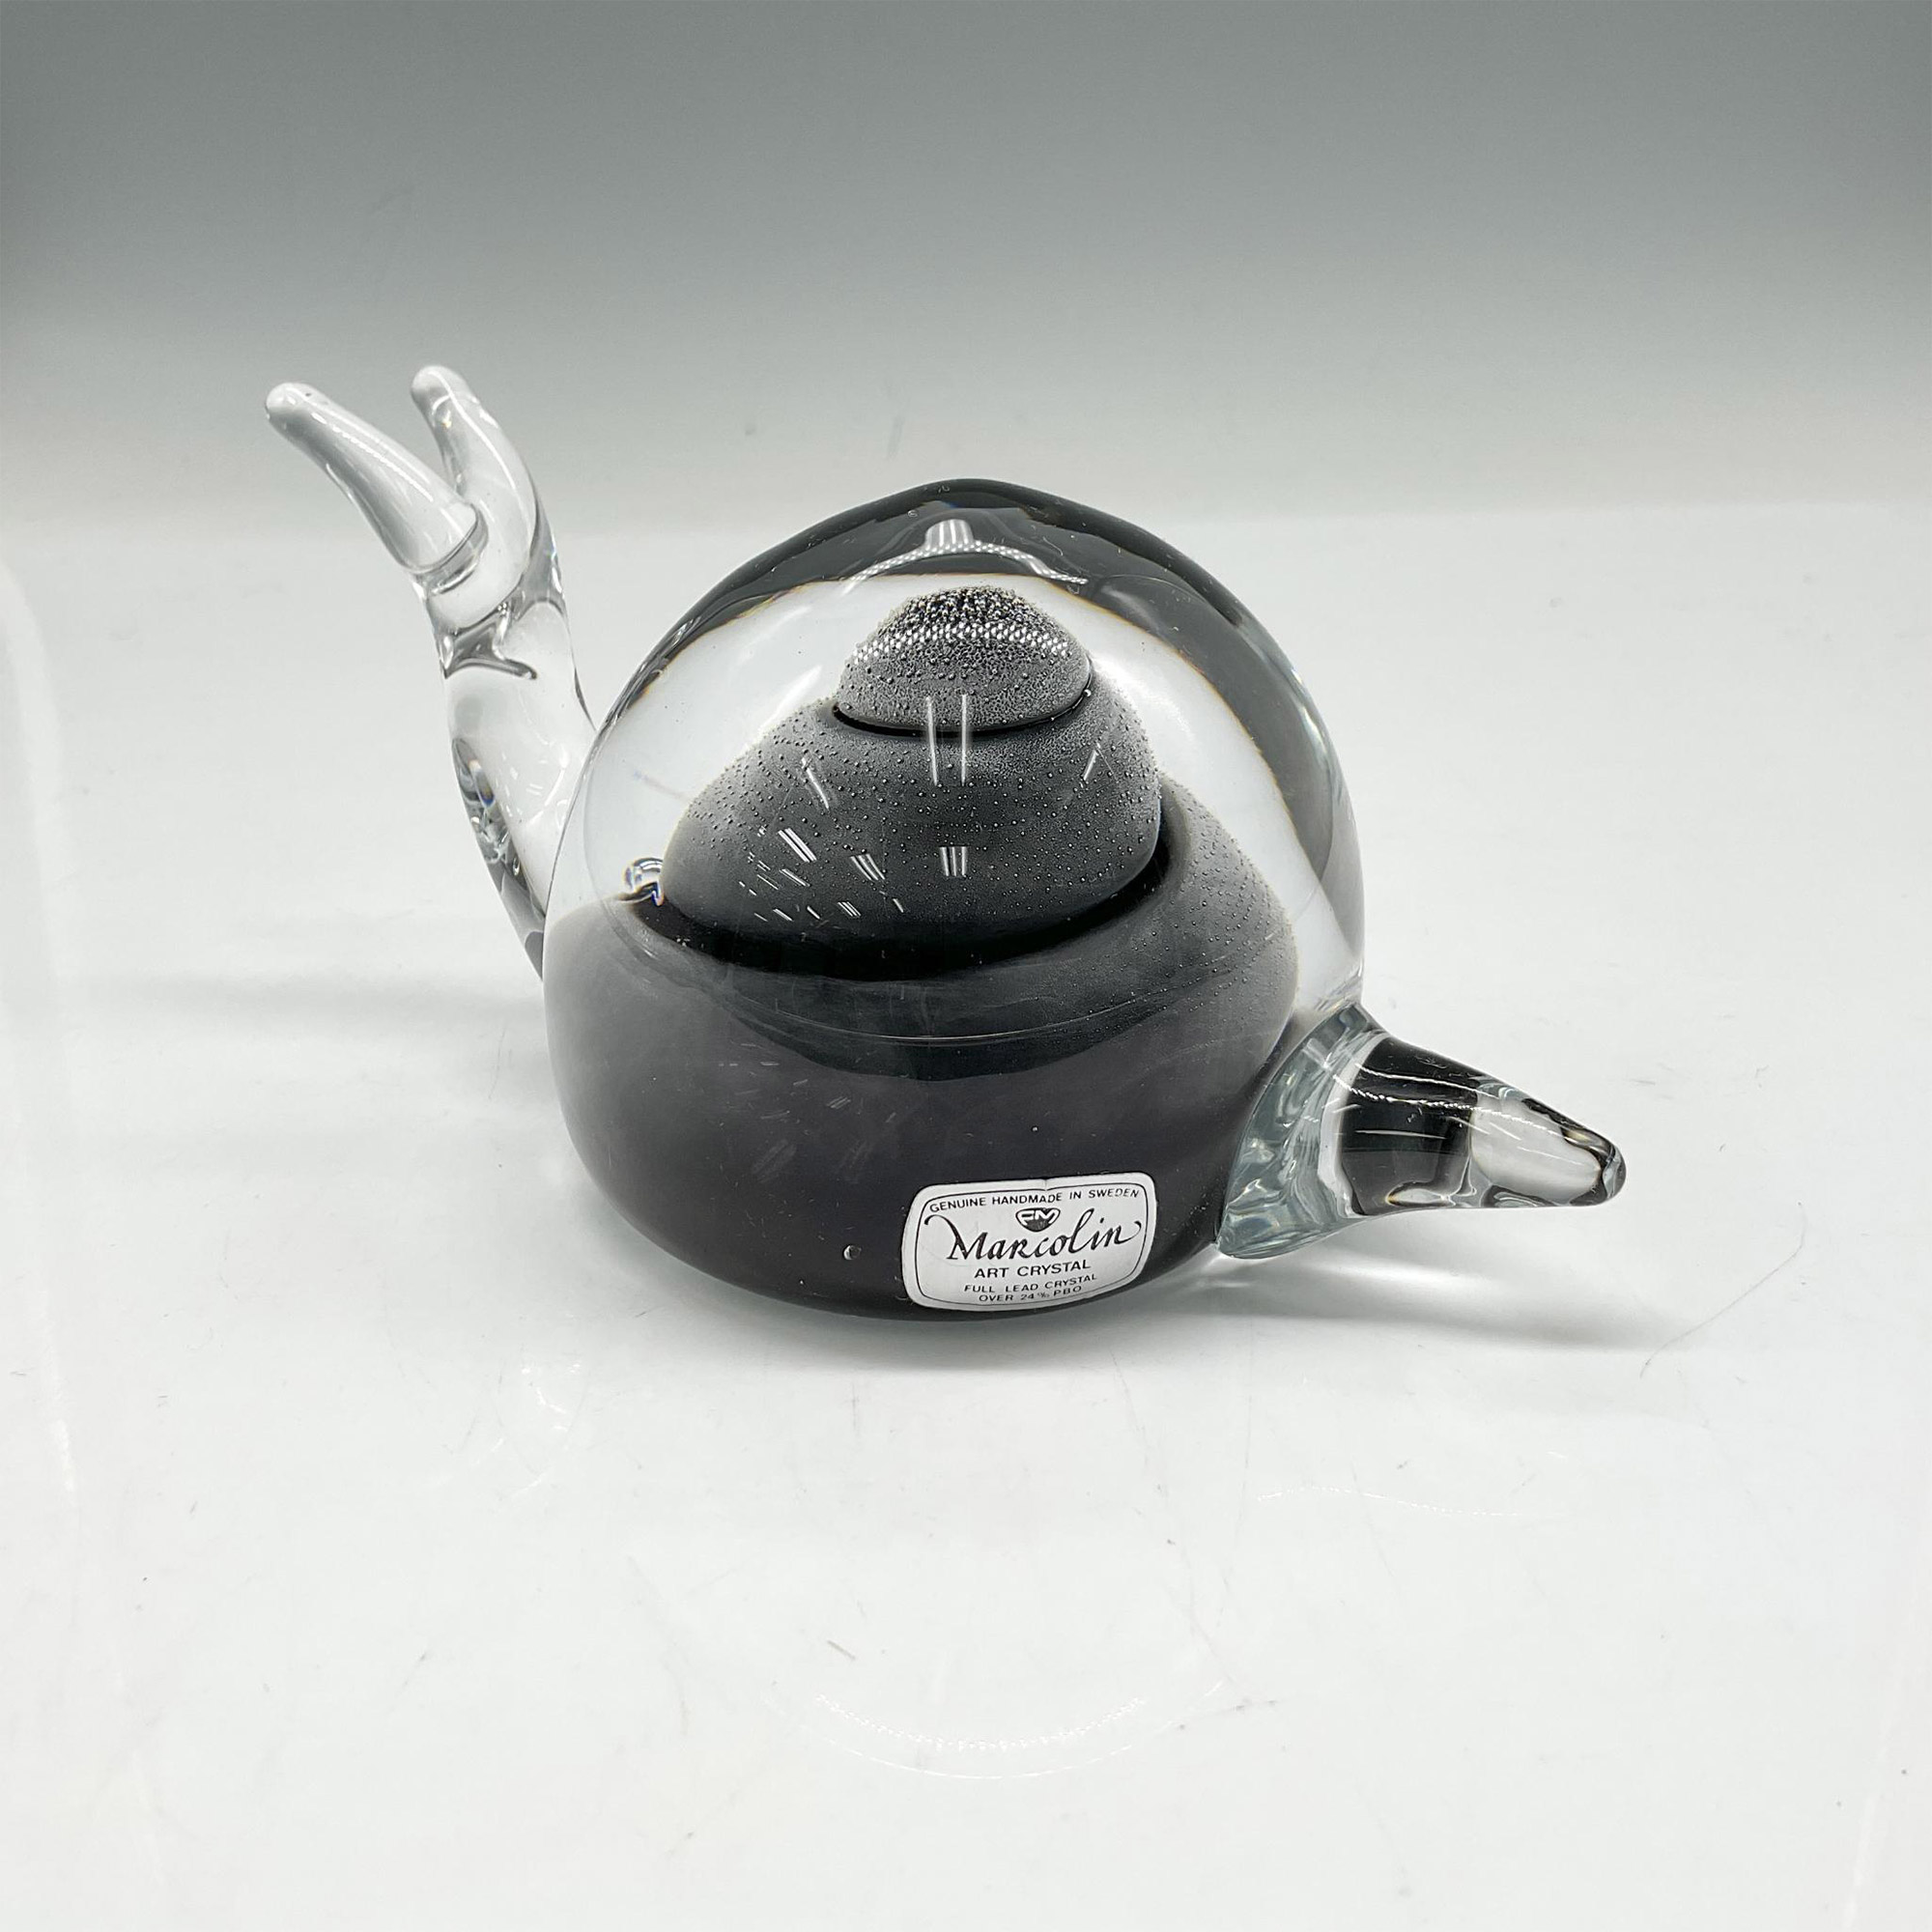 Marcolin Art Crystal Snail Paperweight - Image 3 of 4